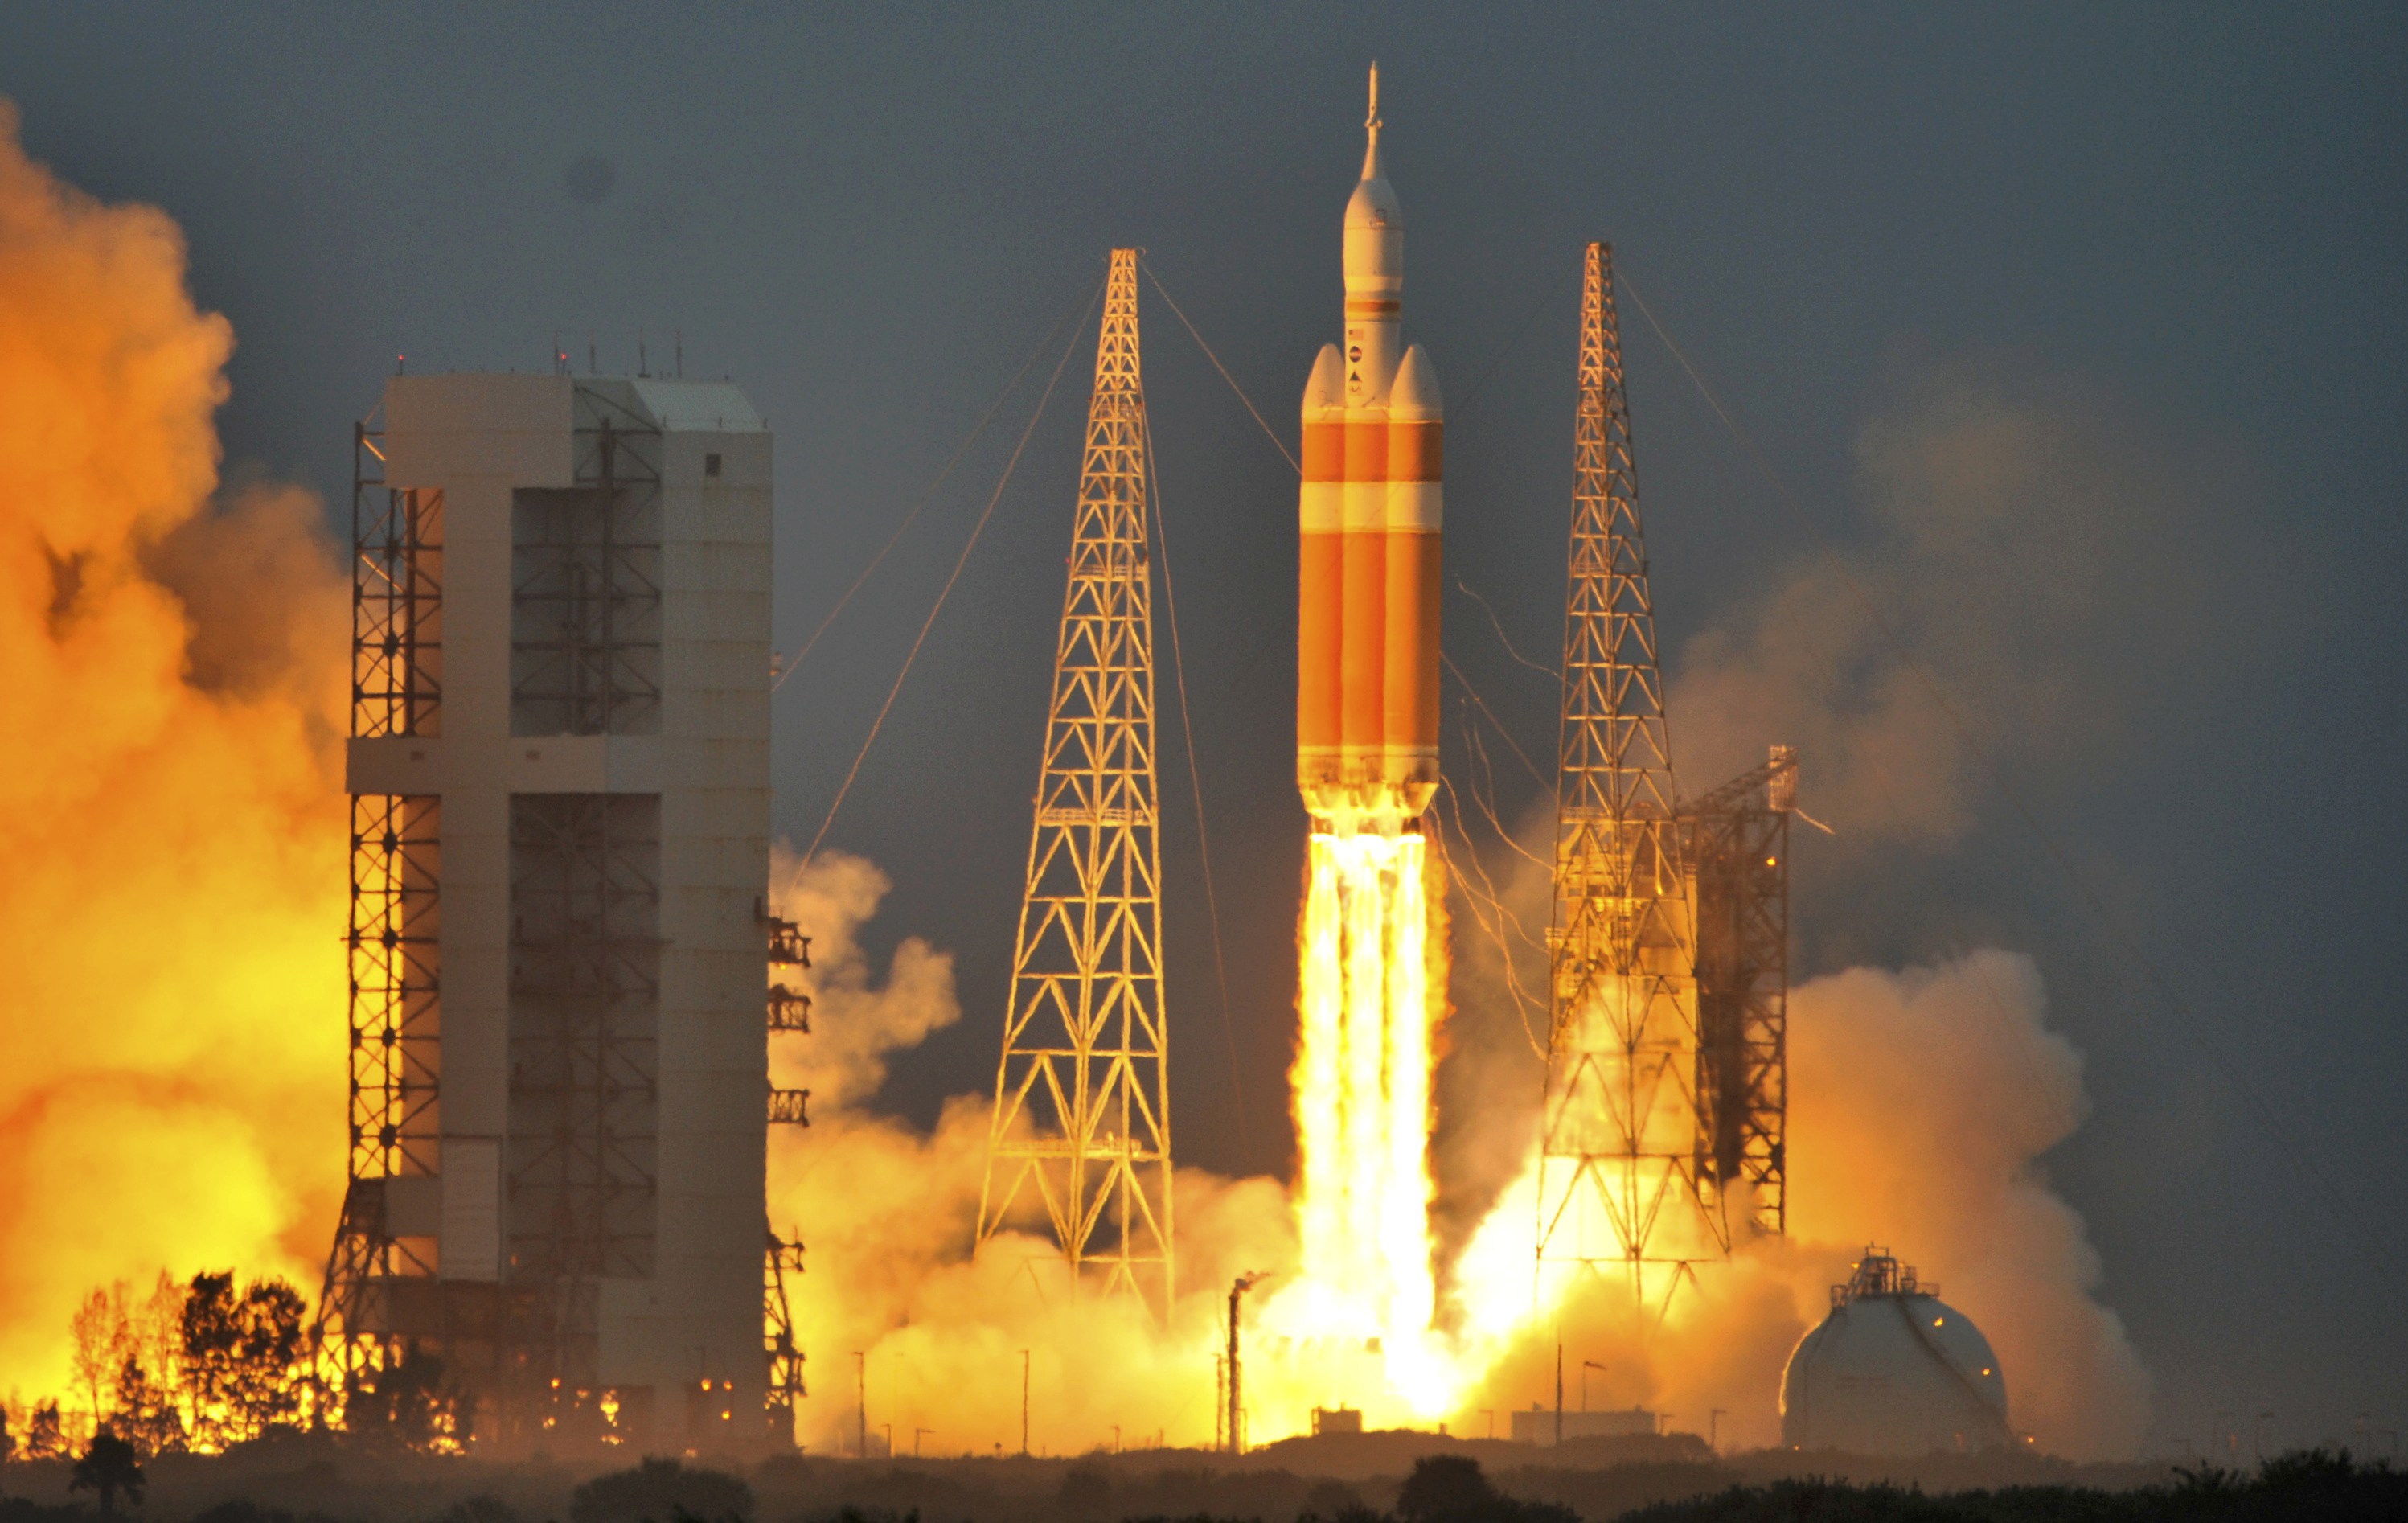 Textbook launch for NASAs Orion spacecraft pic